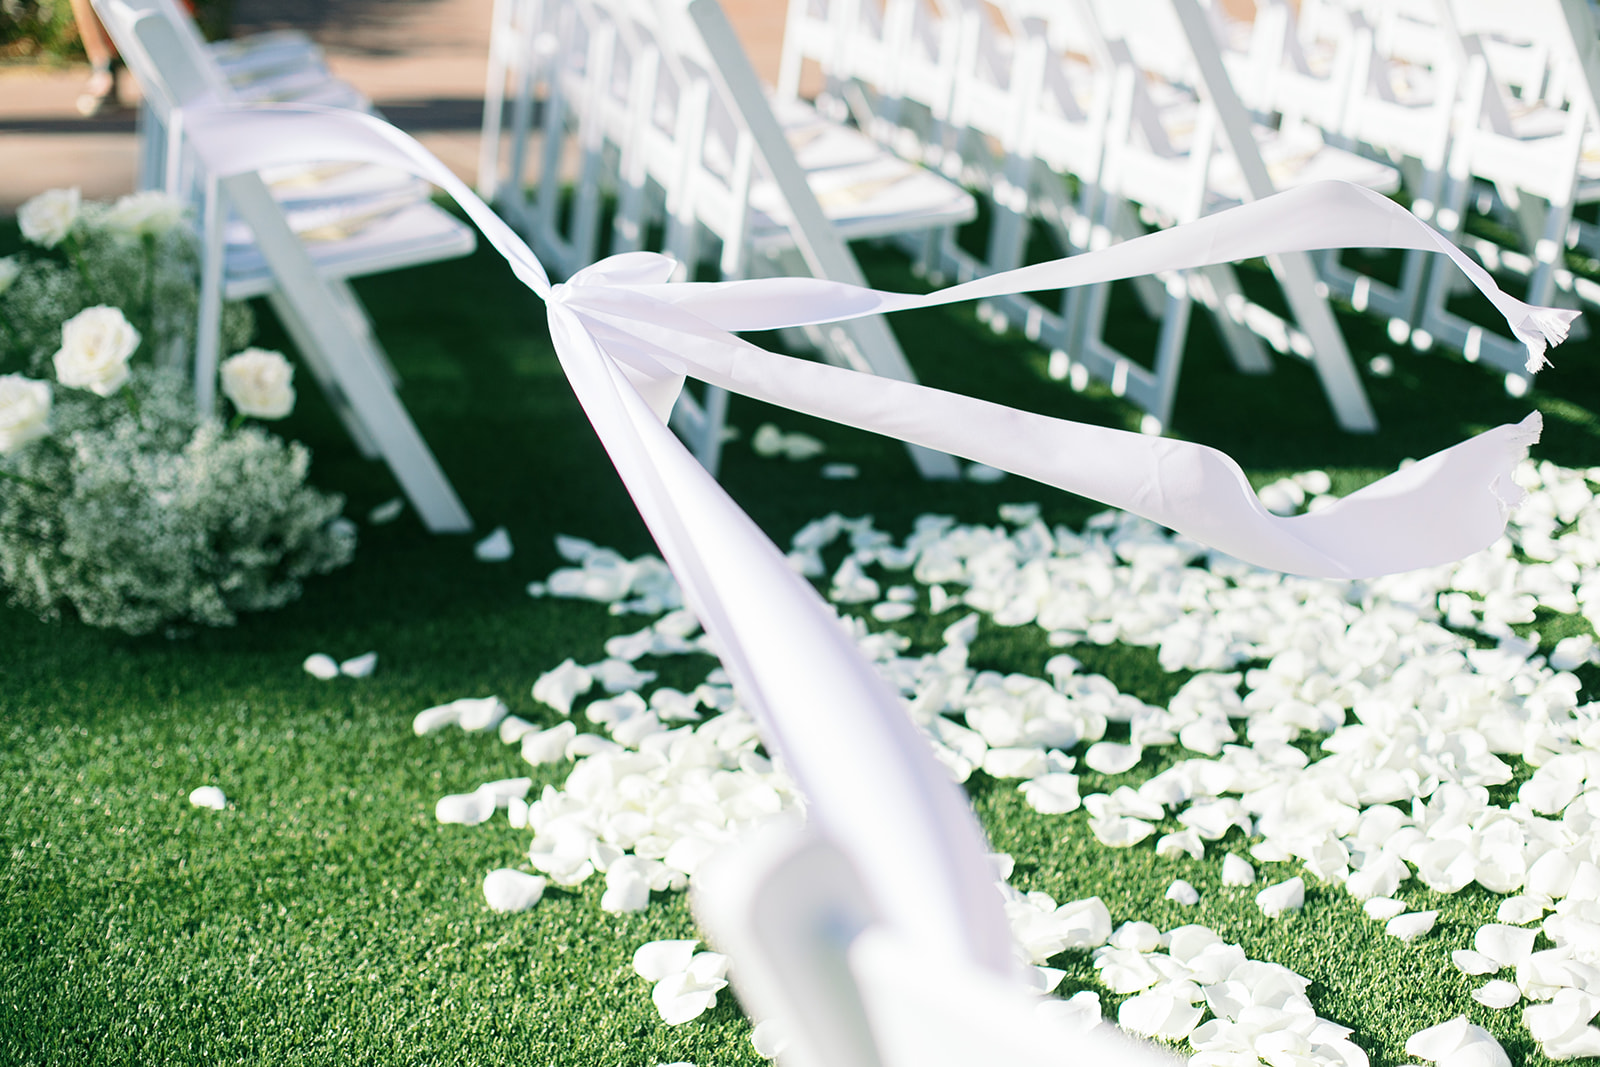 White rose petals scattered along wedding ceremony aisle.